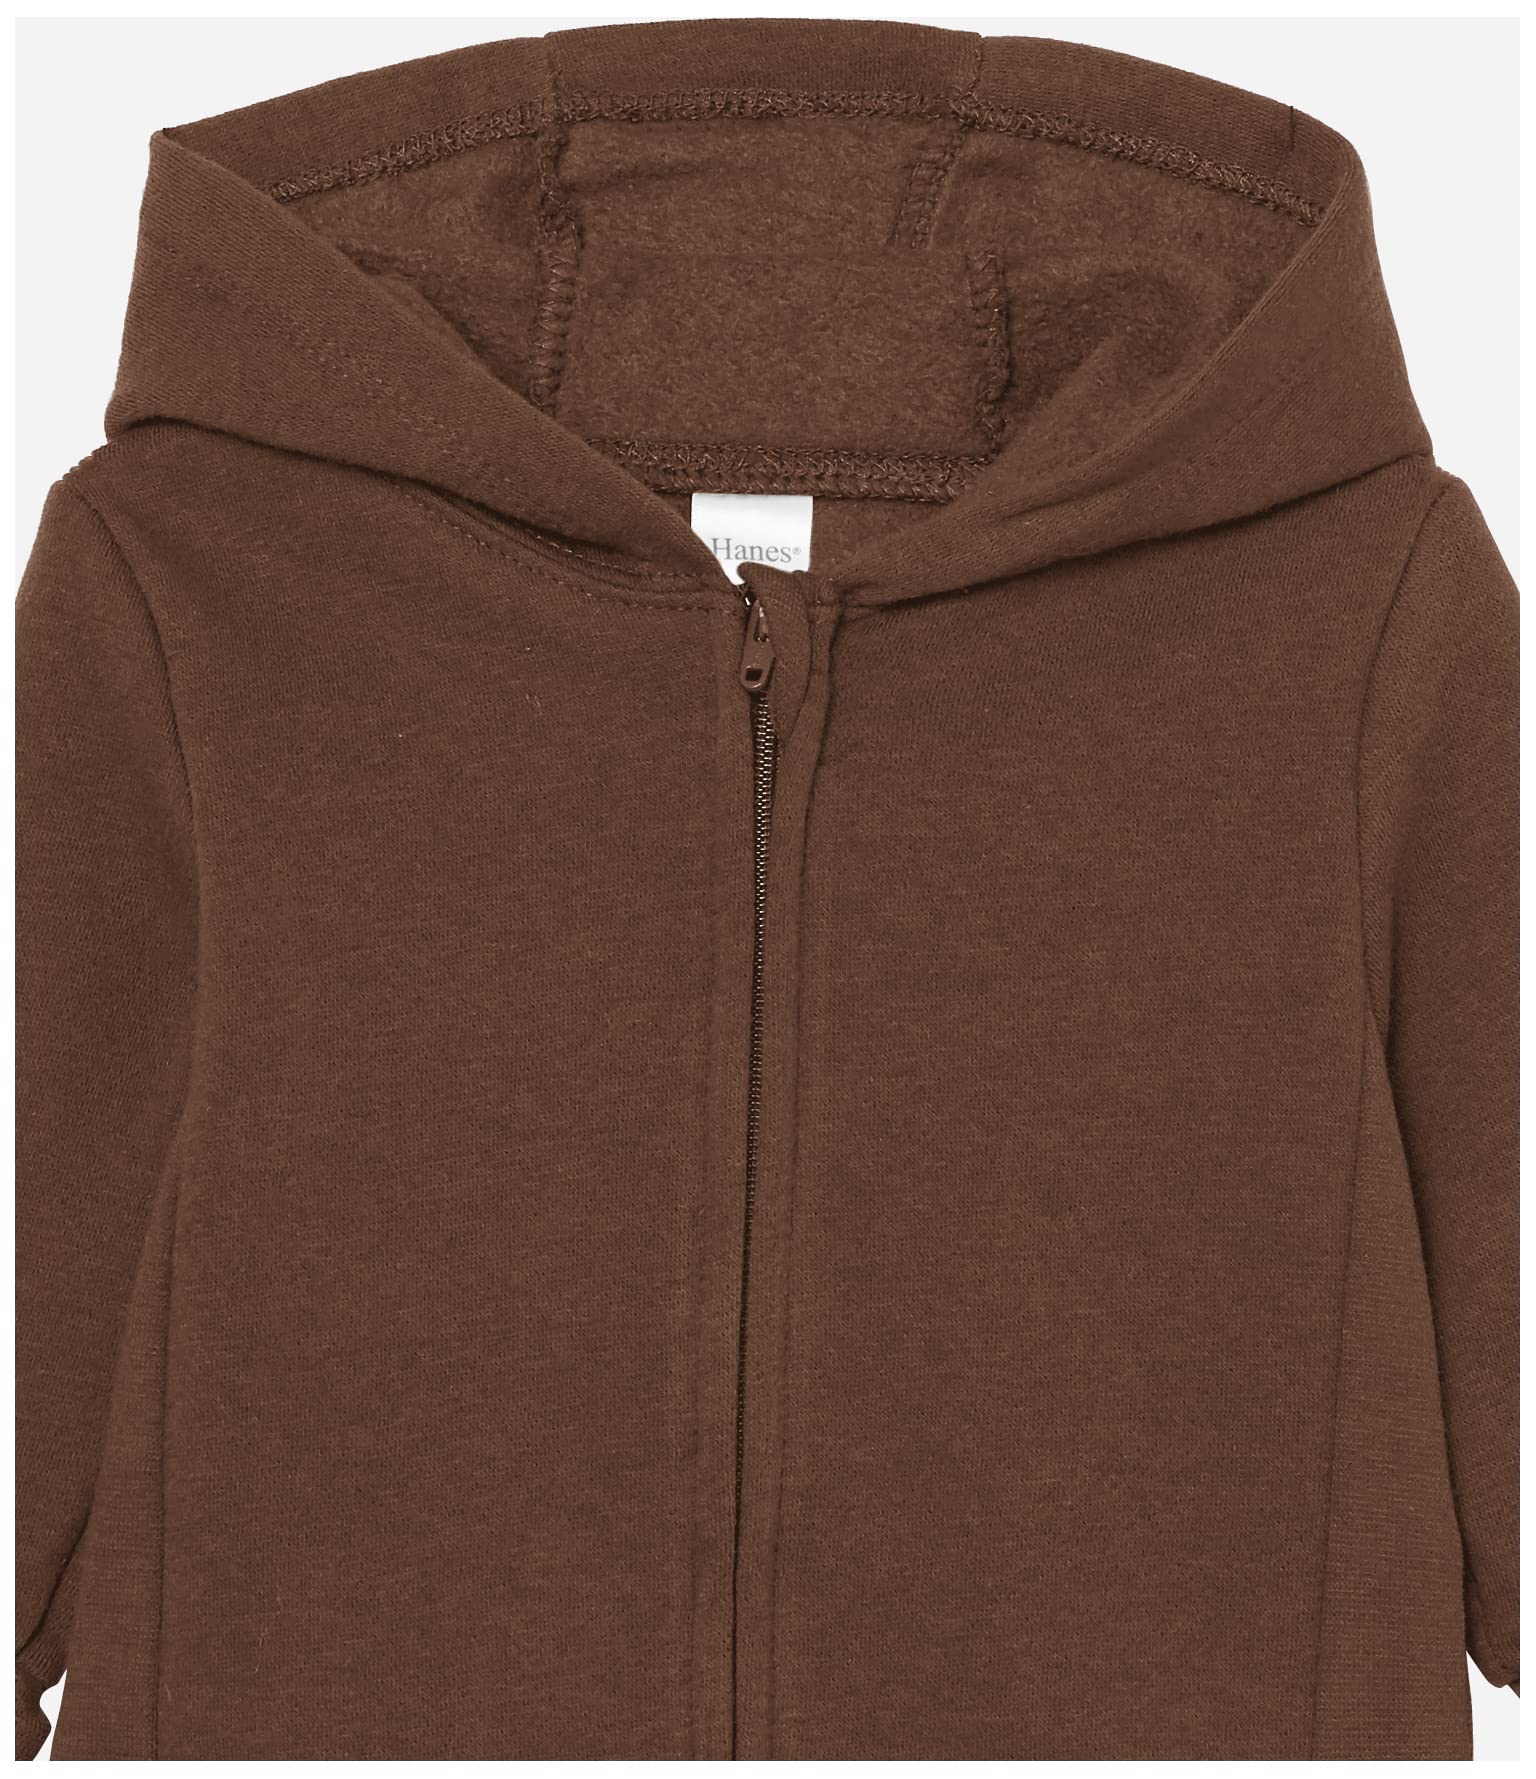 Hanes, Zippin Soft 4-way Stretch Fleece Hoodie, Babies and Toddlers